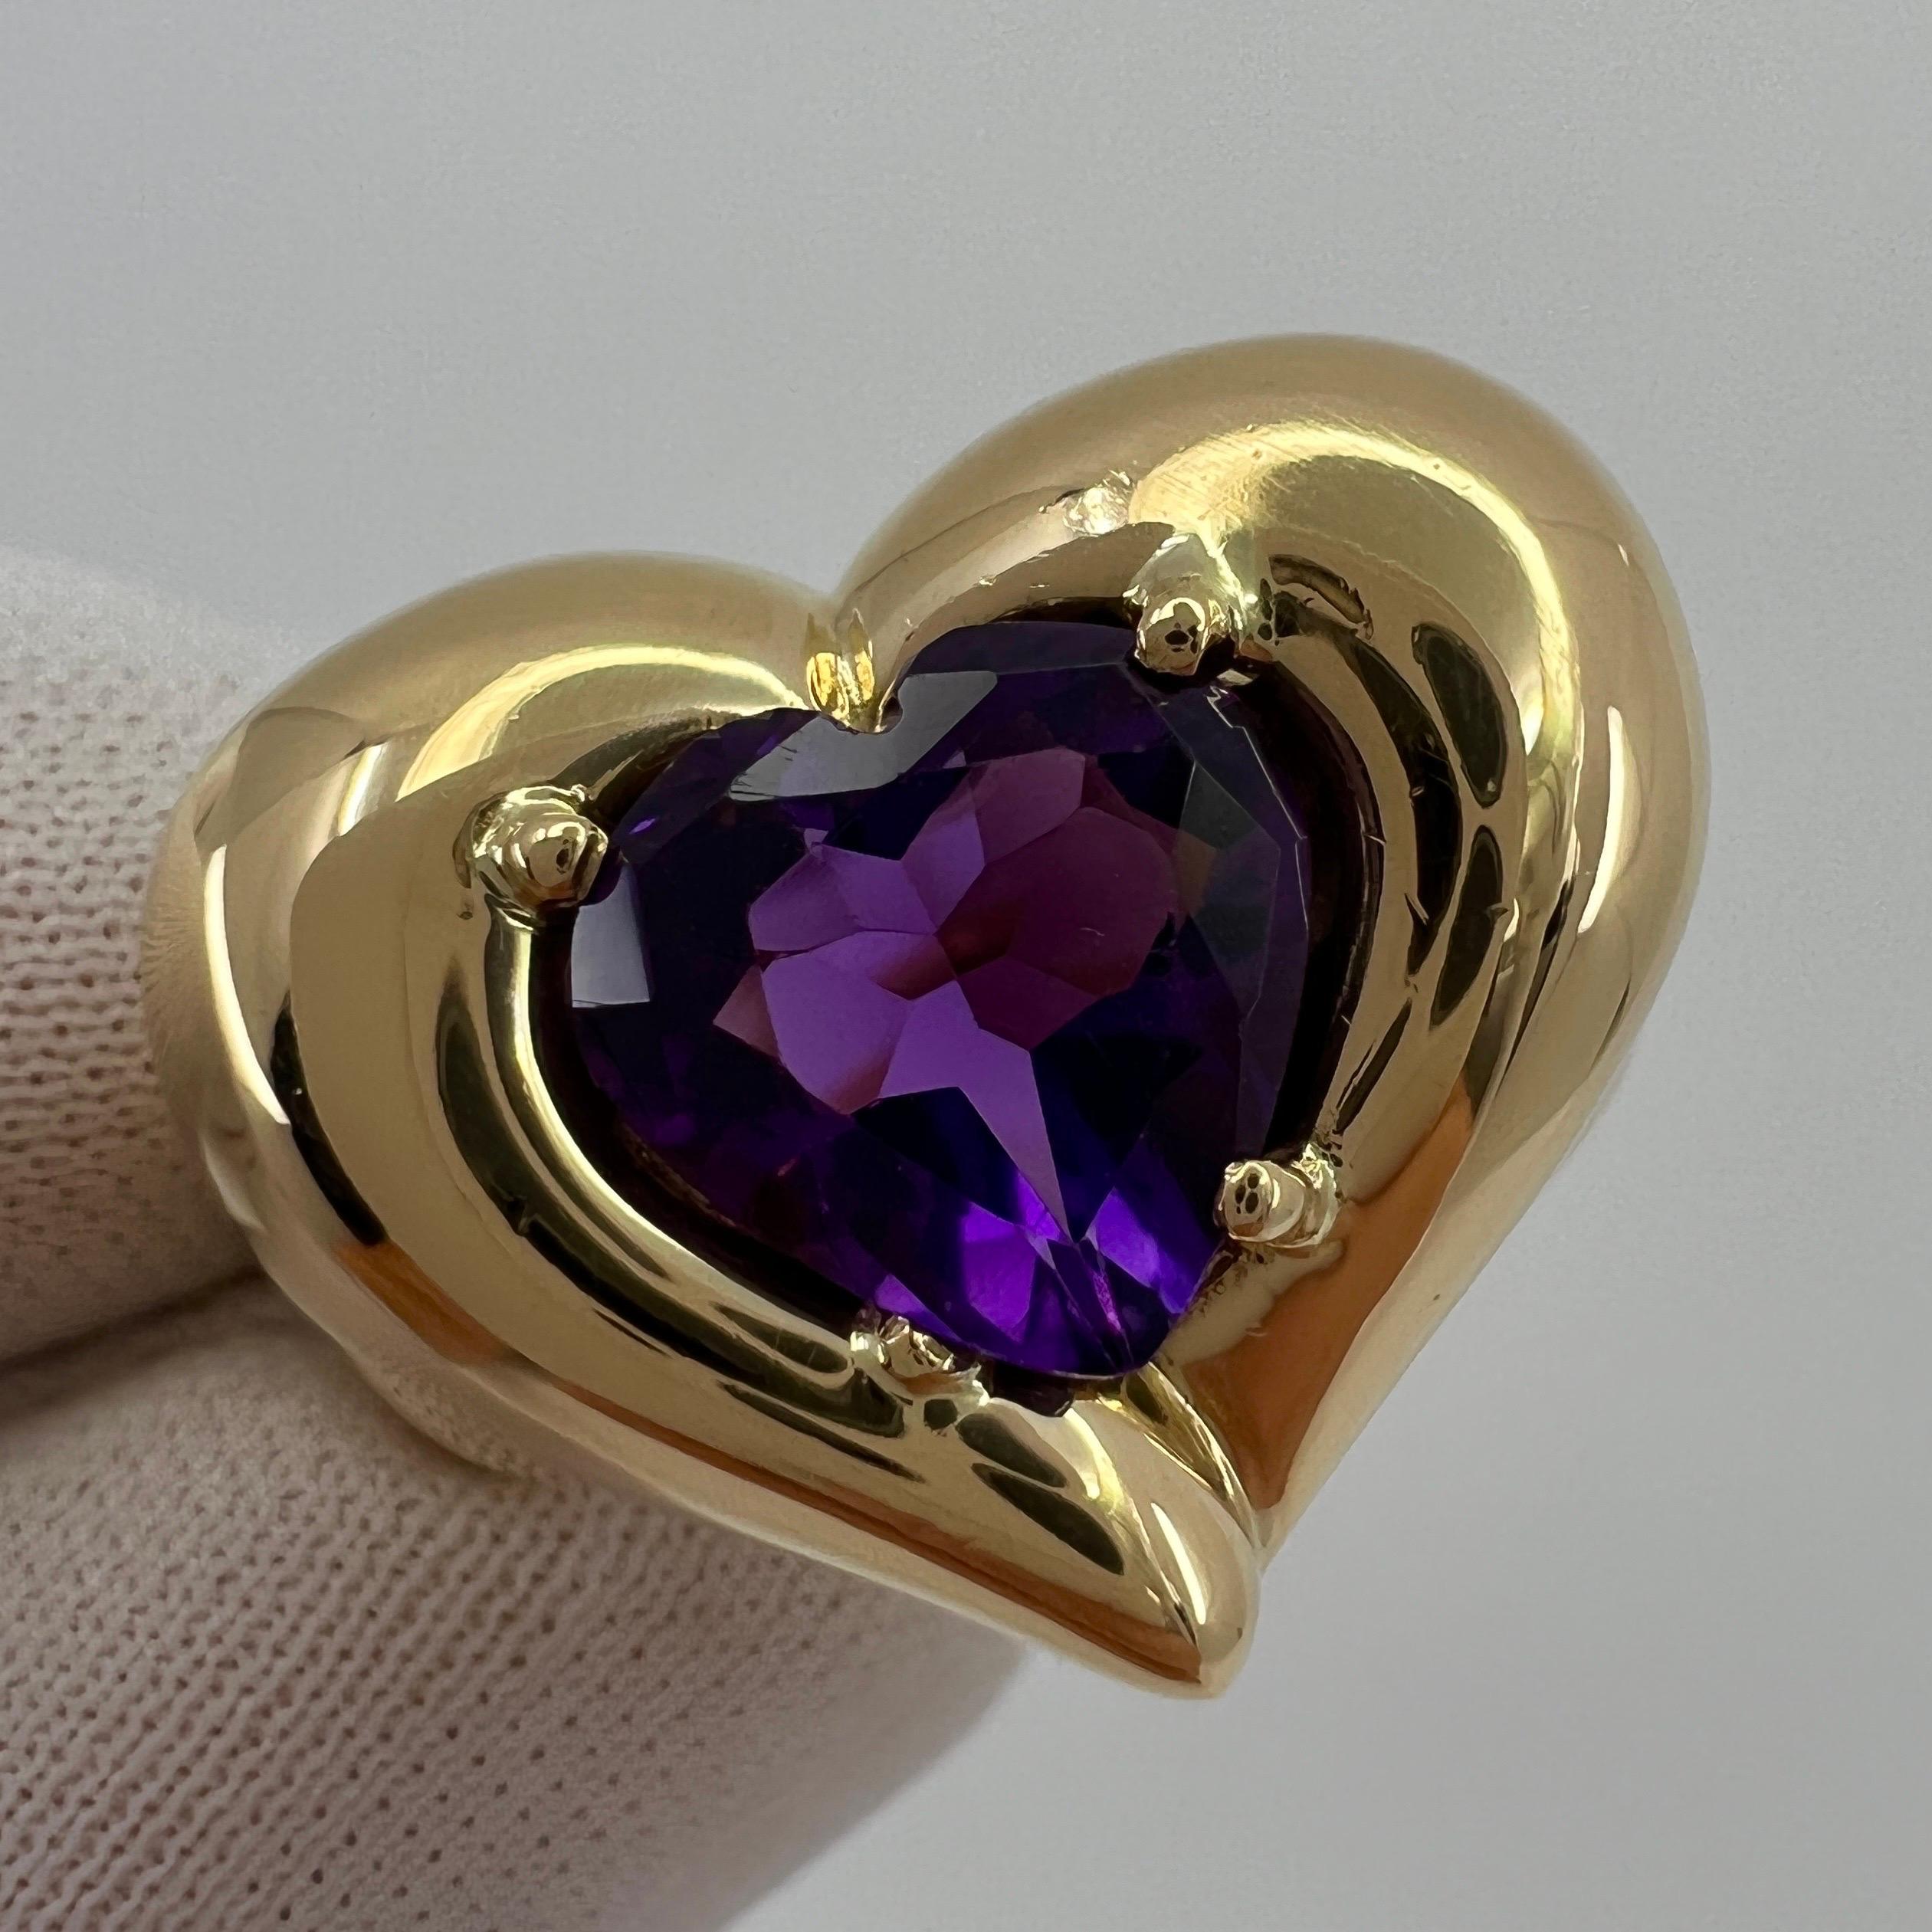 Rare Vintage Van Cleef & Arpels 18k Yellow Gold Amethyst Heart Ring with Box 7